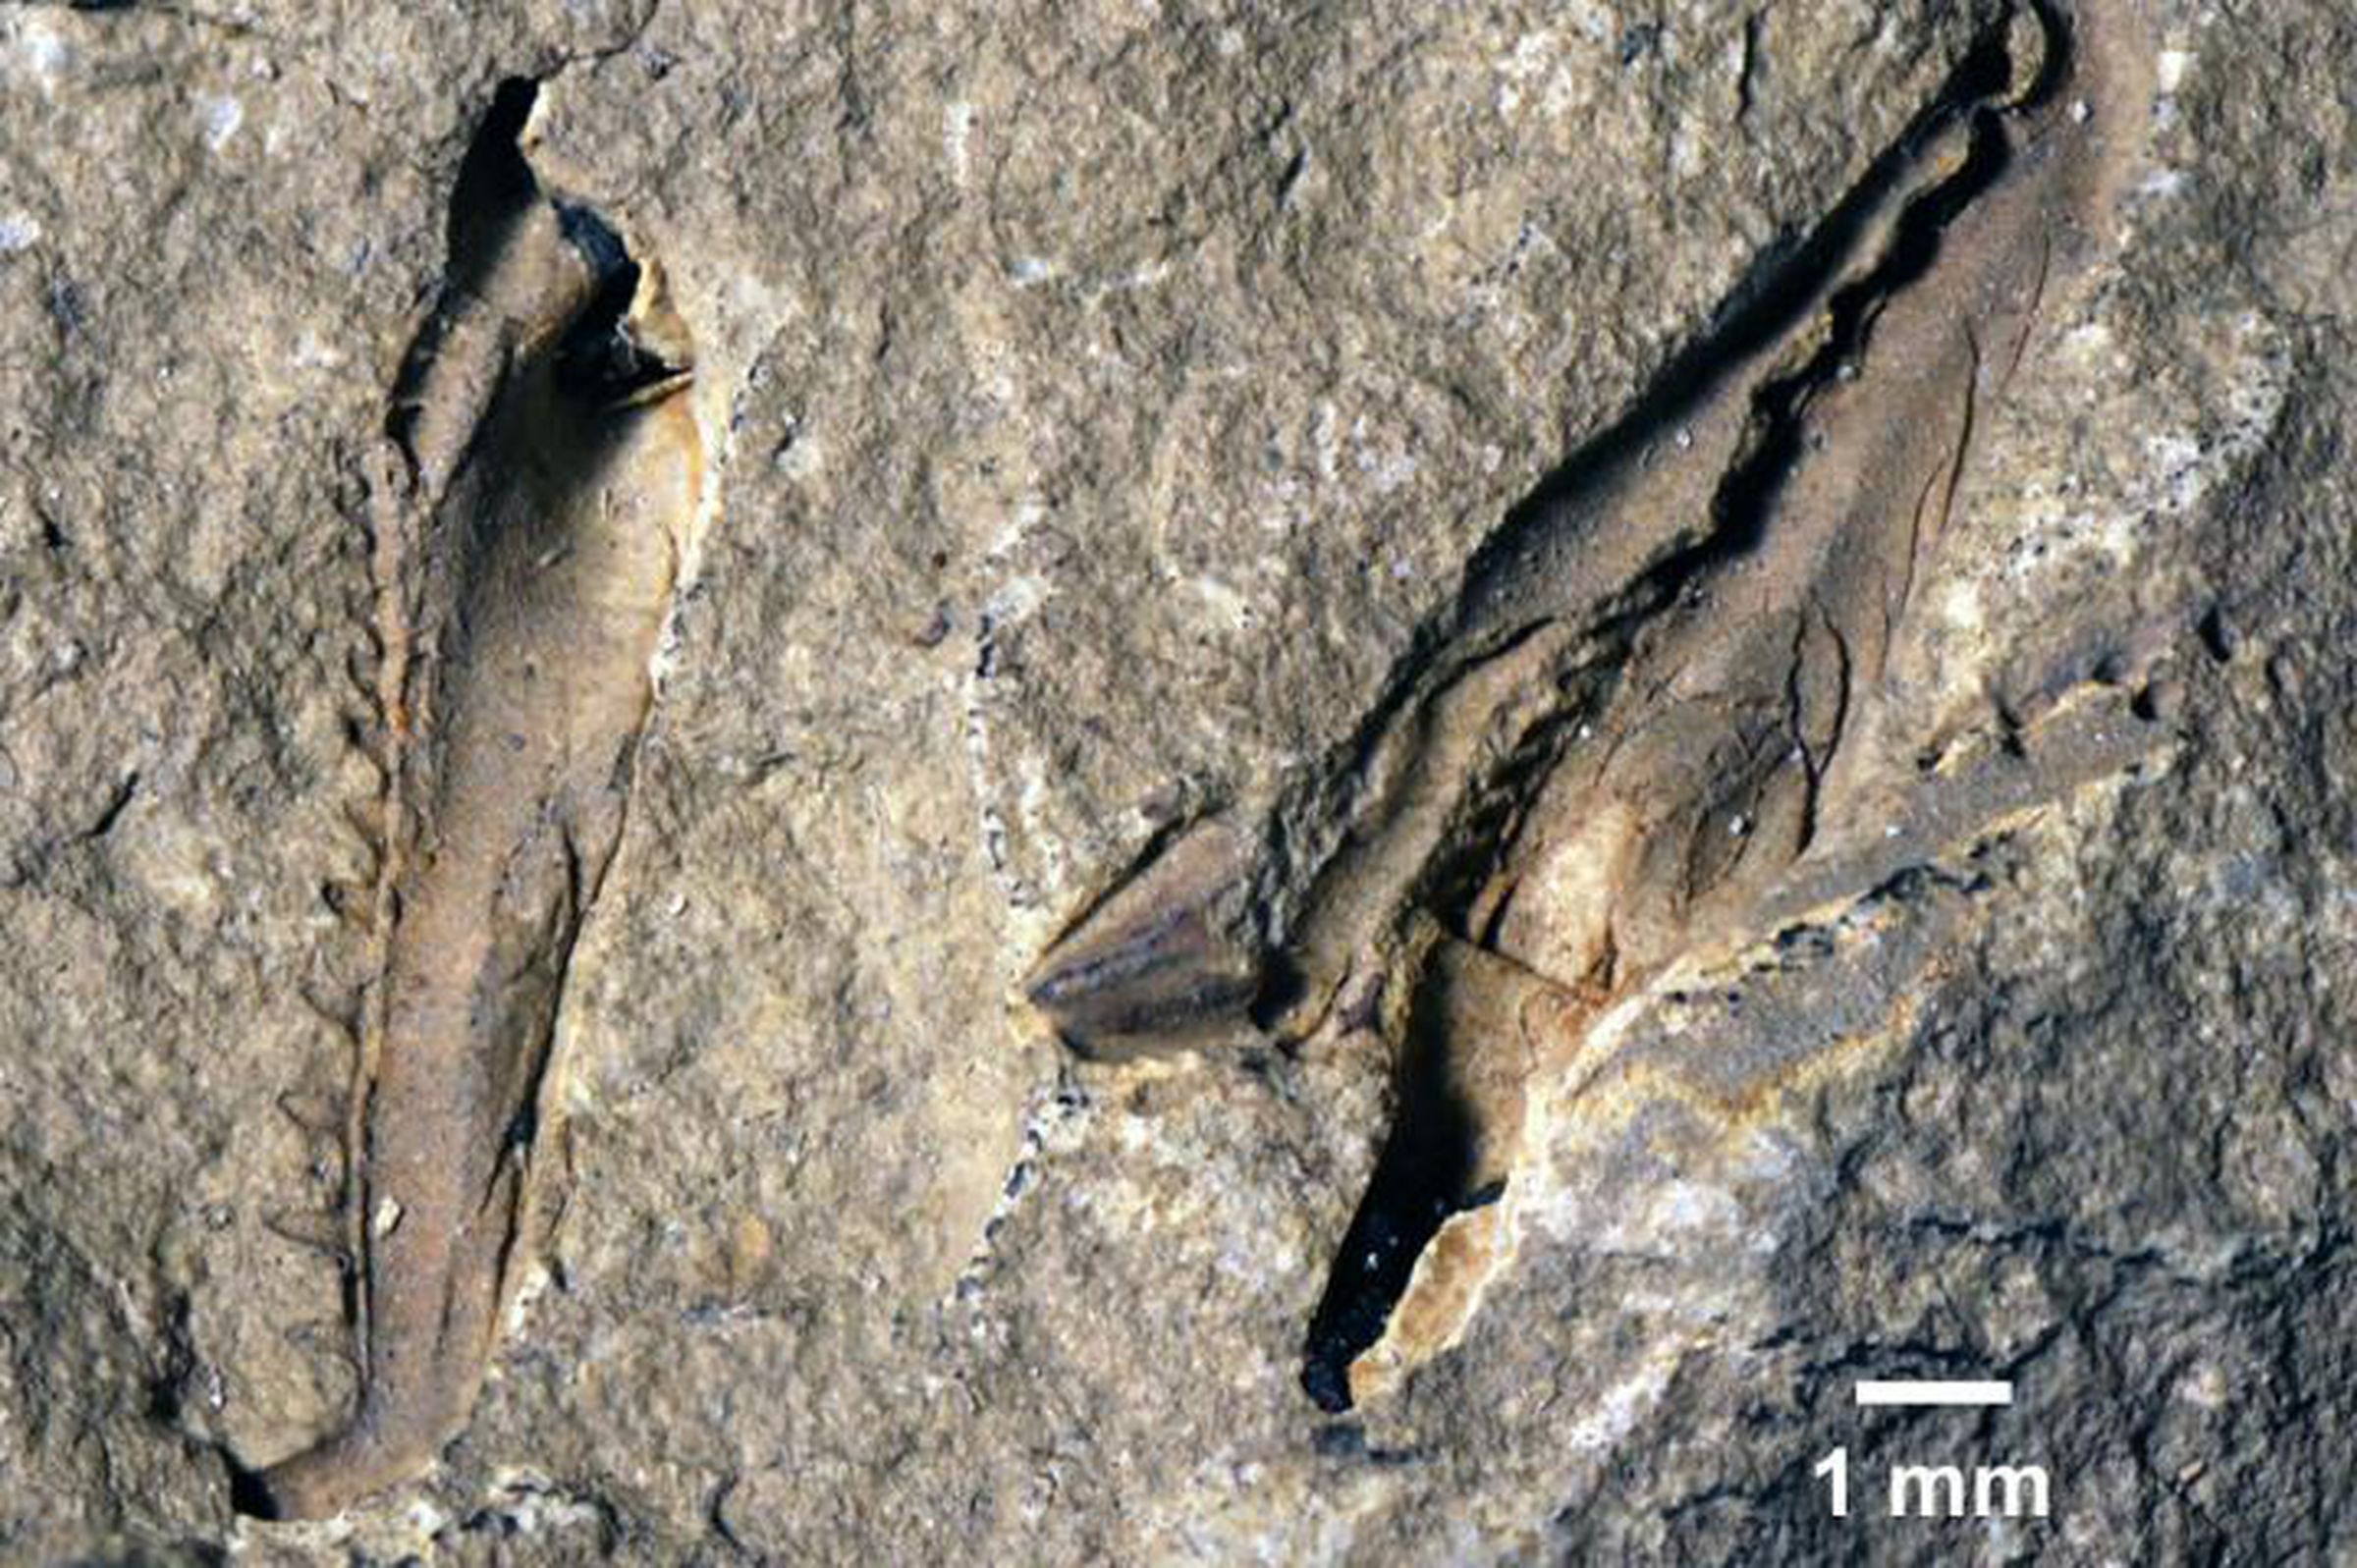 The fossil jaws